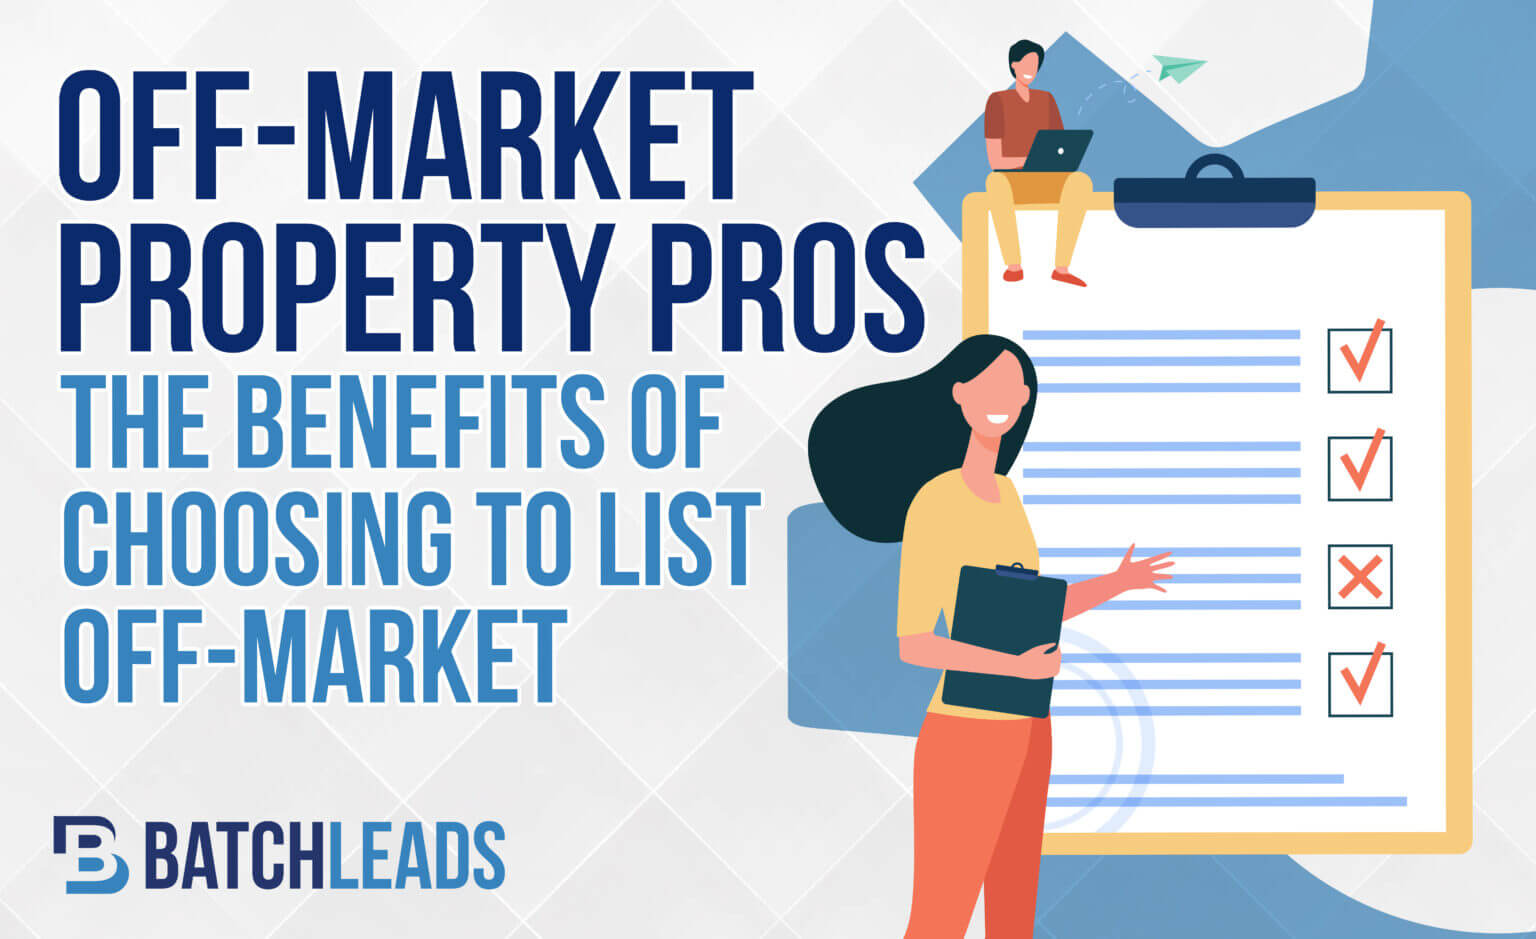 Off-Market Property Pros The Benefits Of Choosing To List Off-Market